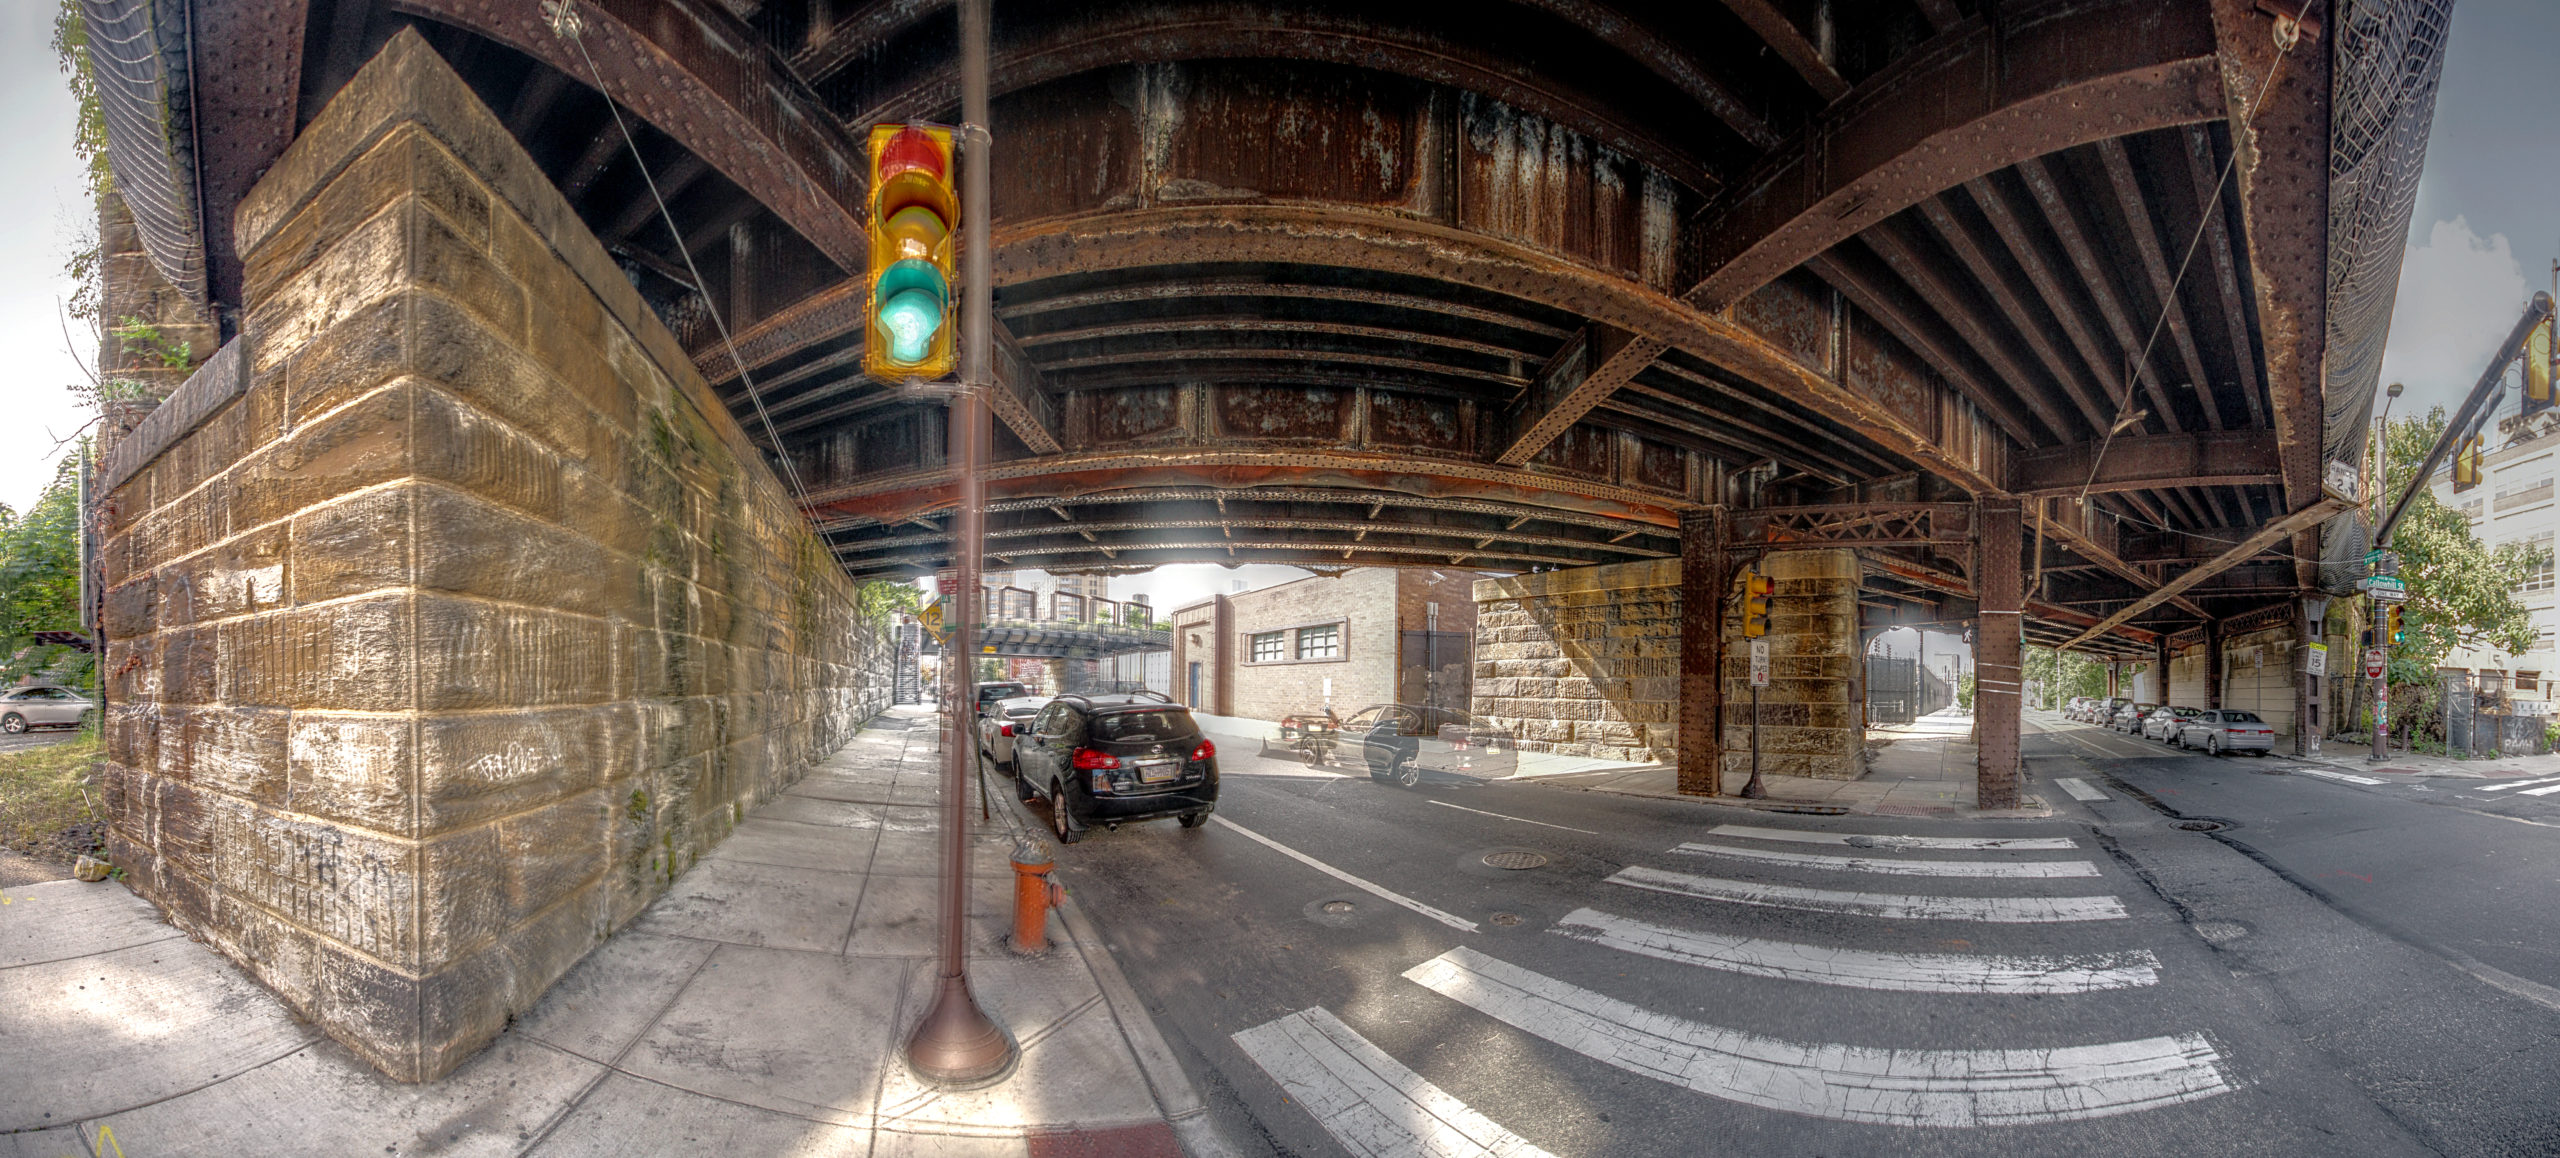 Reading Viaduct 11th and Callowhill Streets Philadelphia, PA Copyright 2019, Bob Bruhin. All rights reserved.